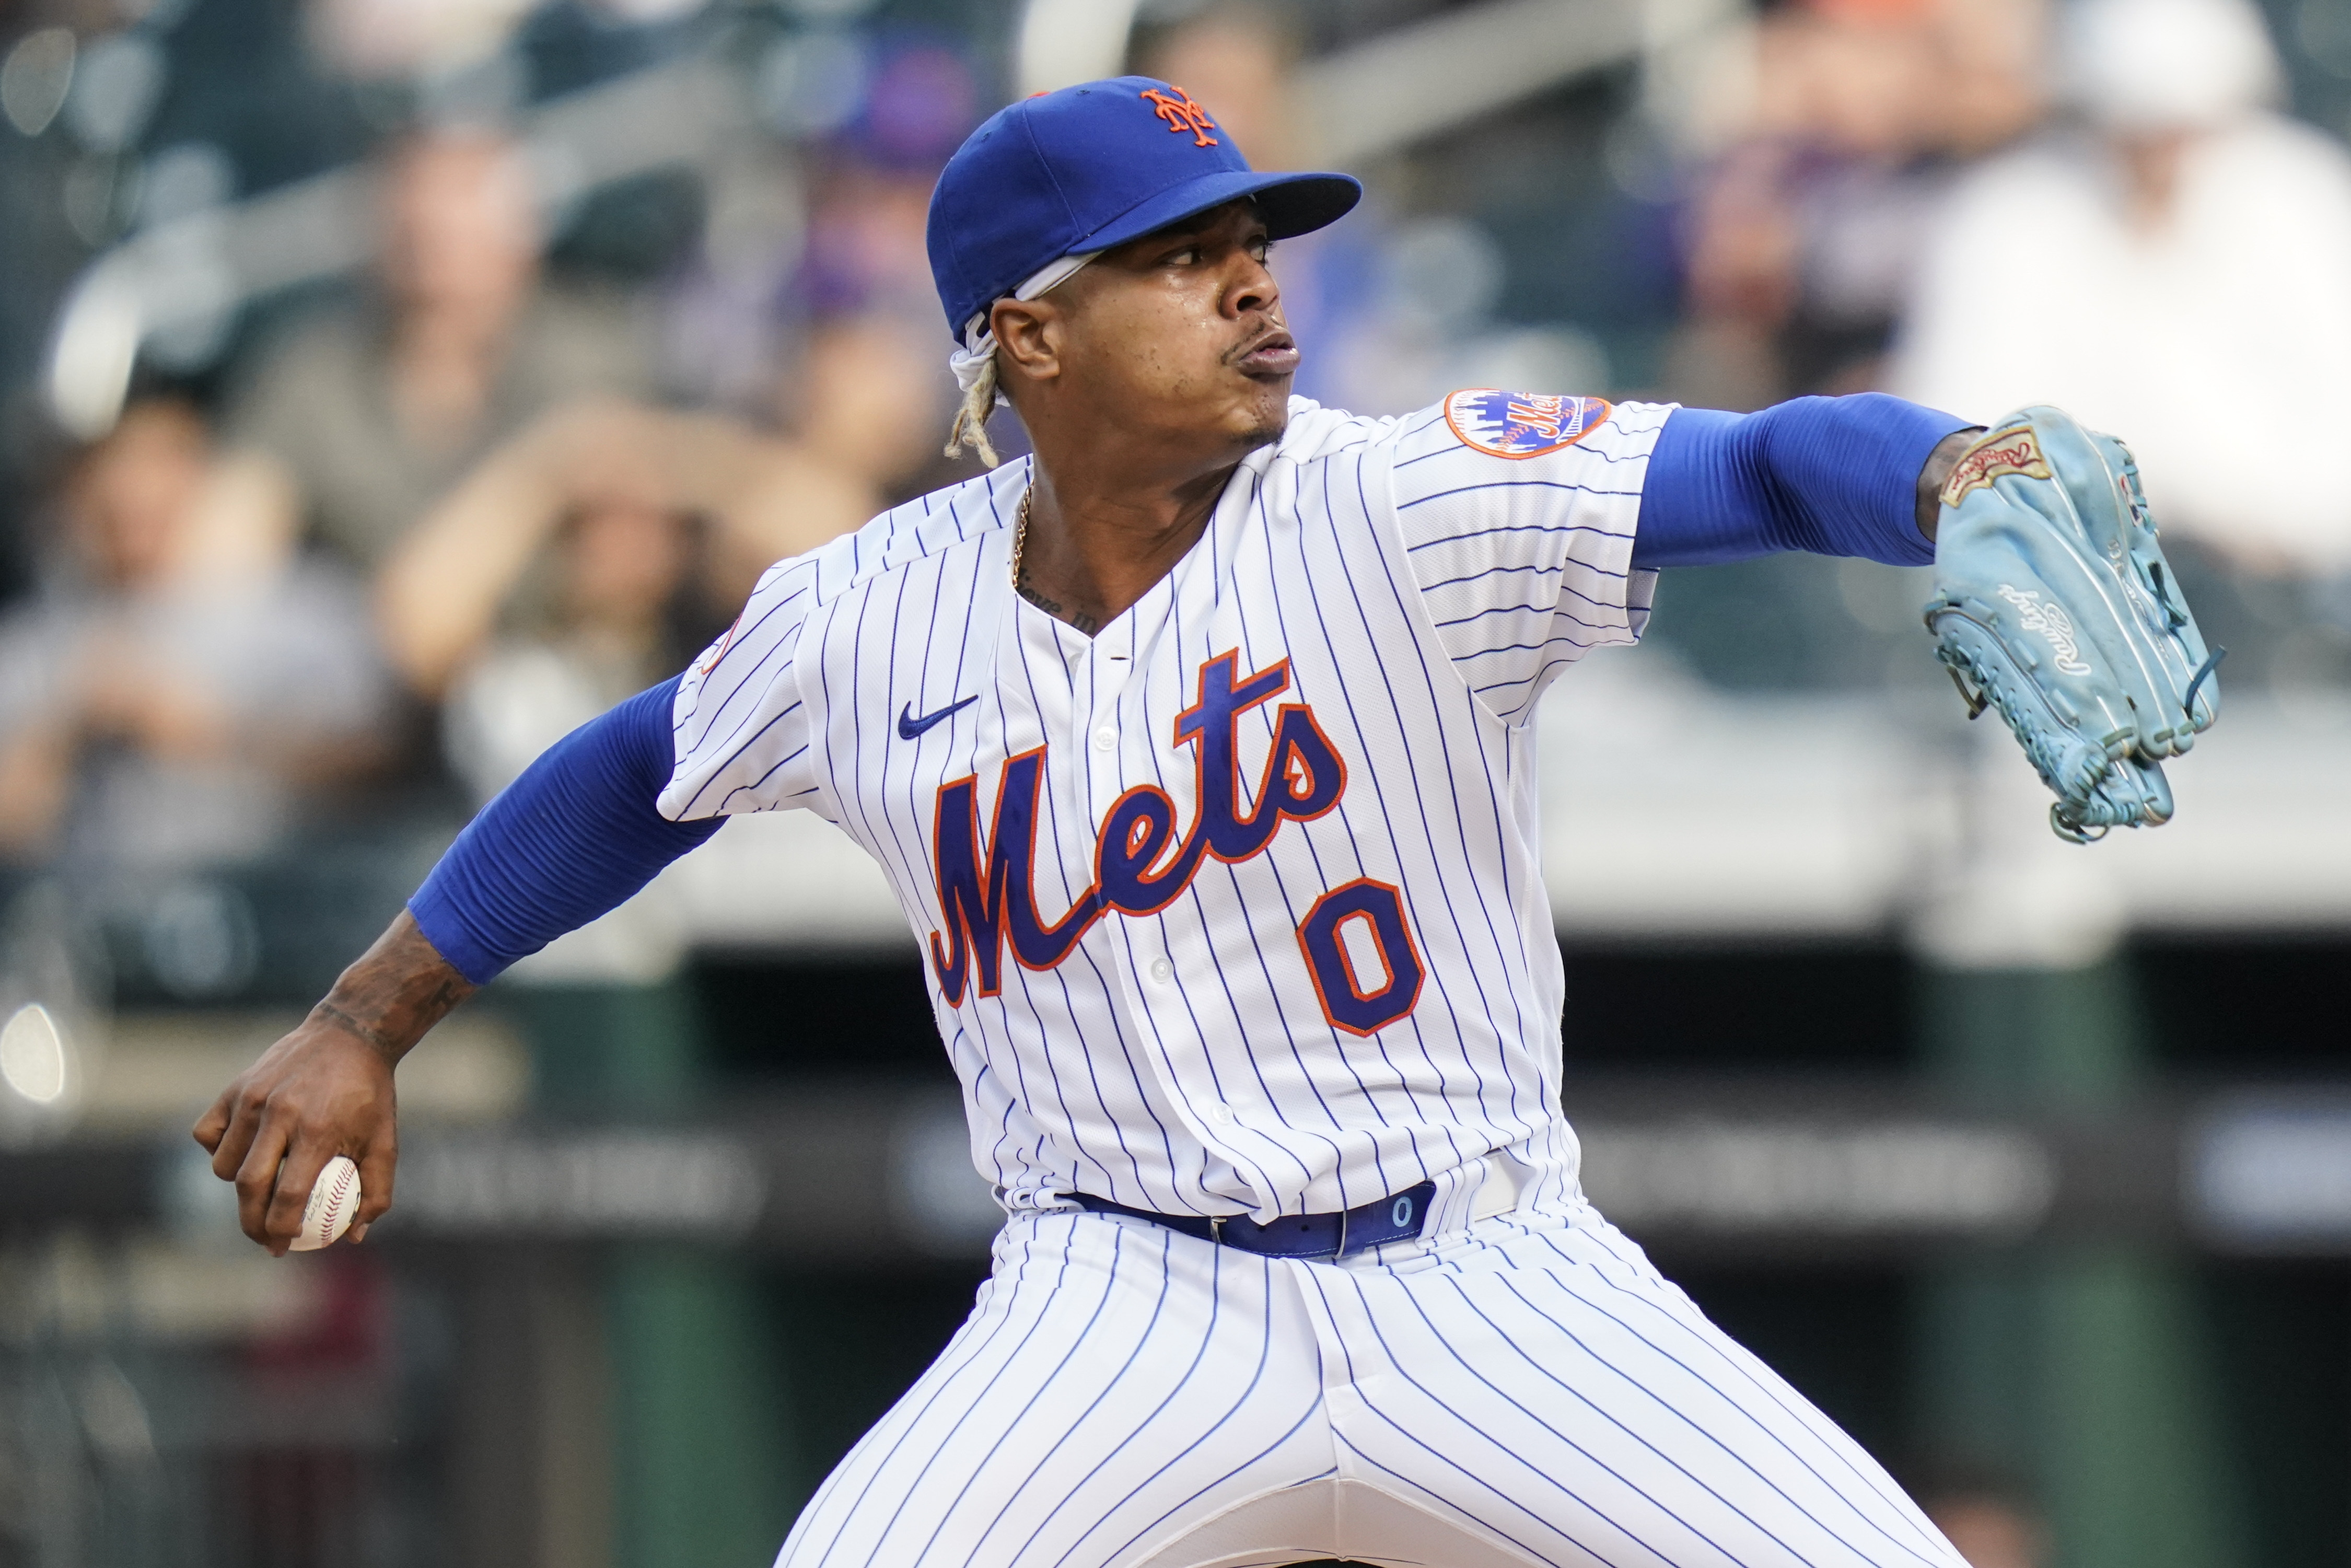 Cubs' Marcus Stroman Says Rob Manfred 'Gotta Go' After CBA Deadline Passes